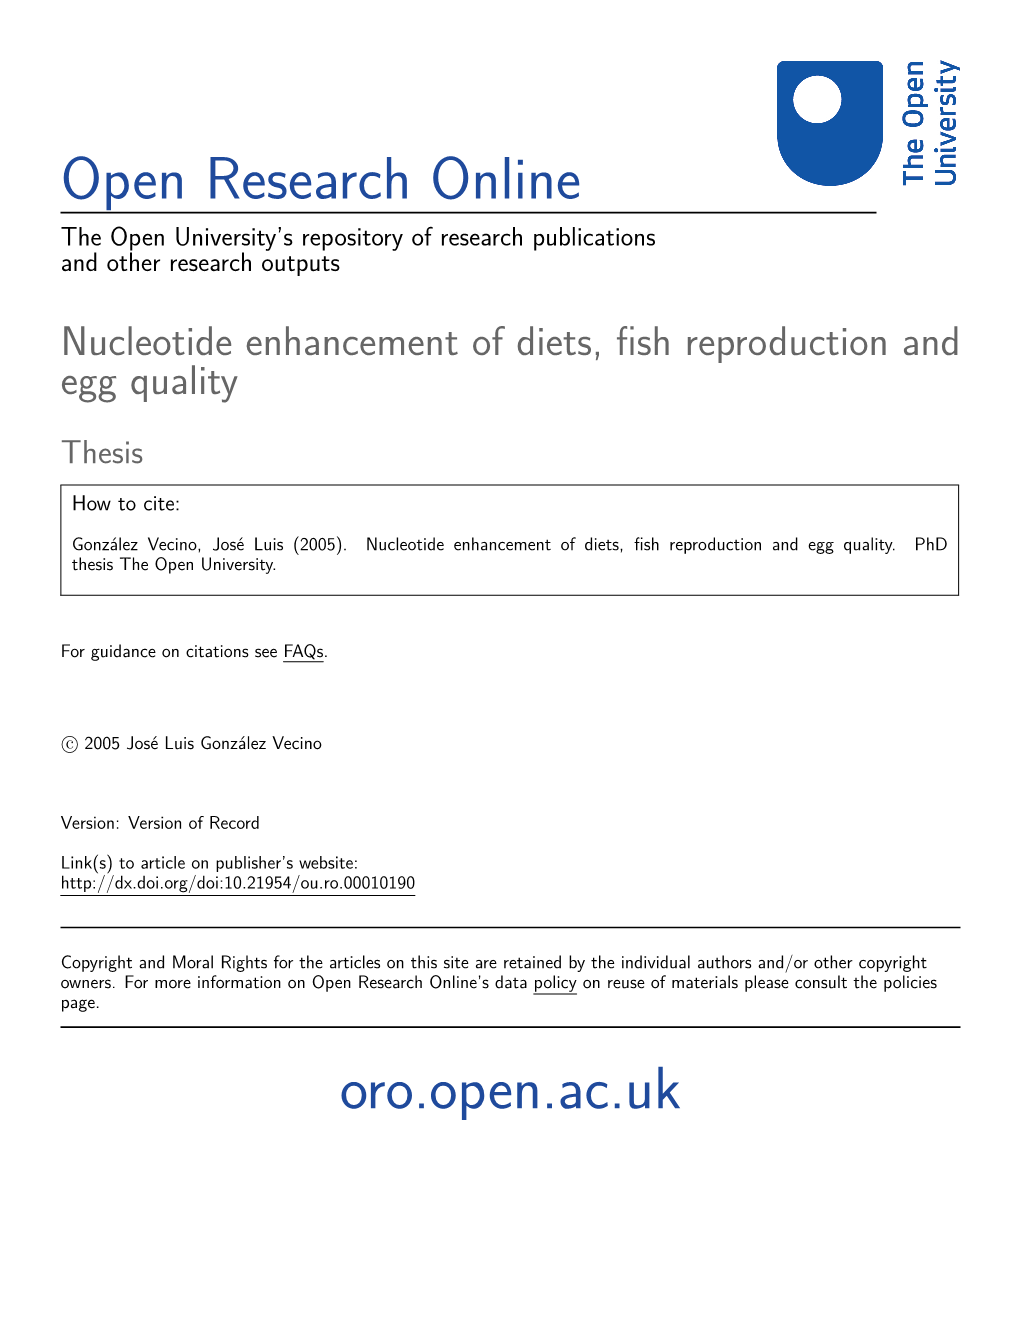 Nucleotide Enhancement of Diets, Fish Reproduction and Egg Quality